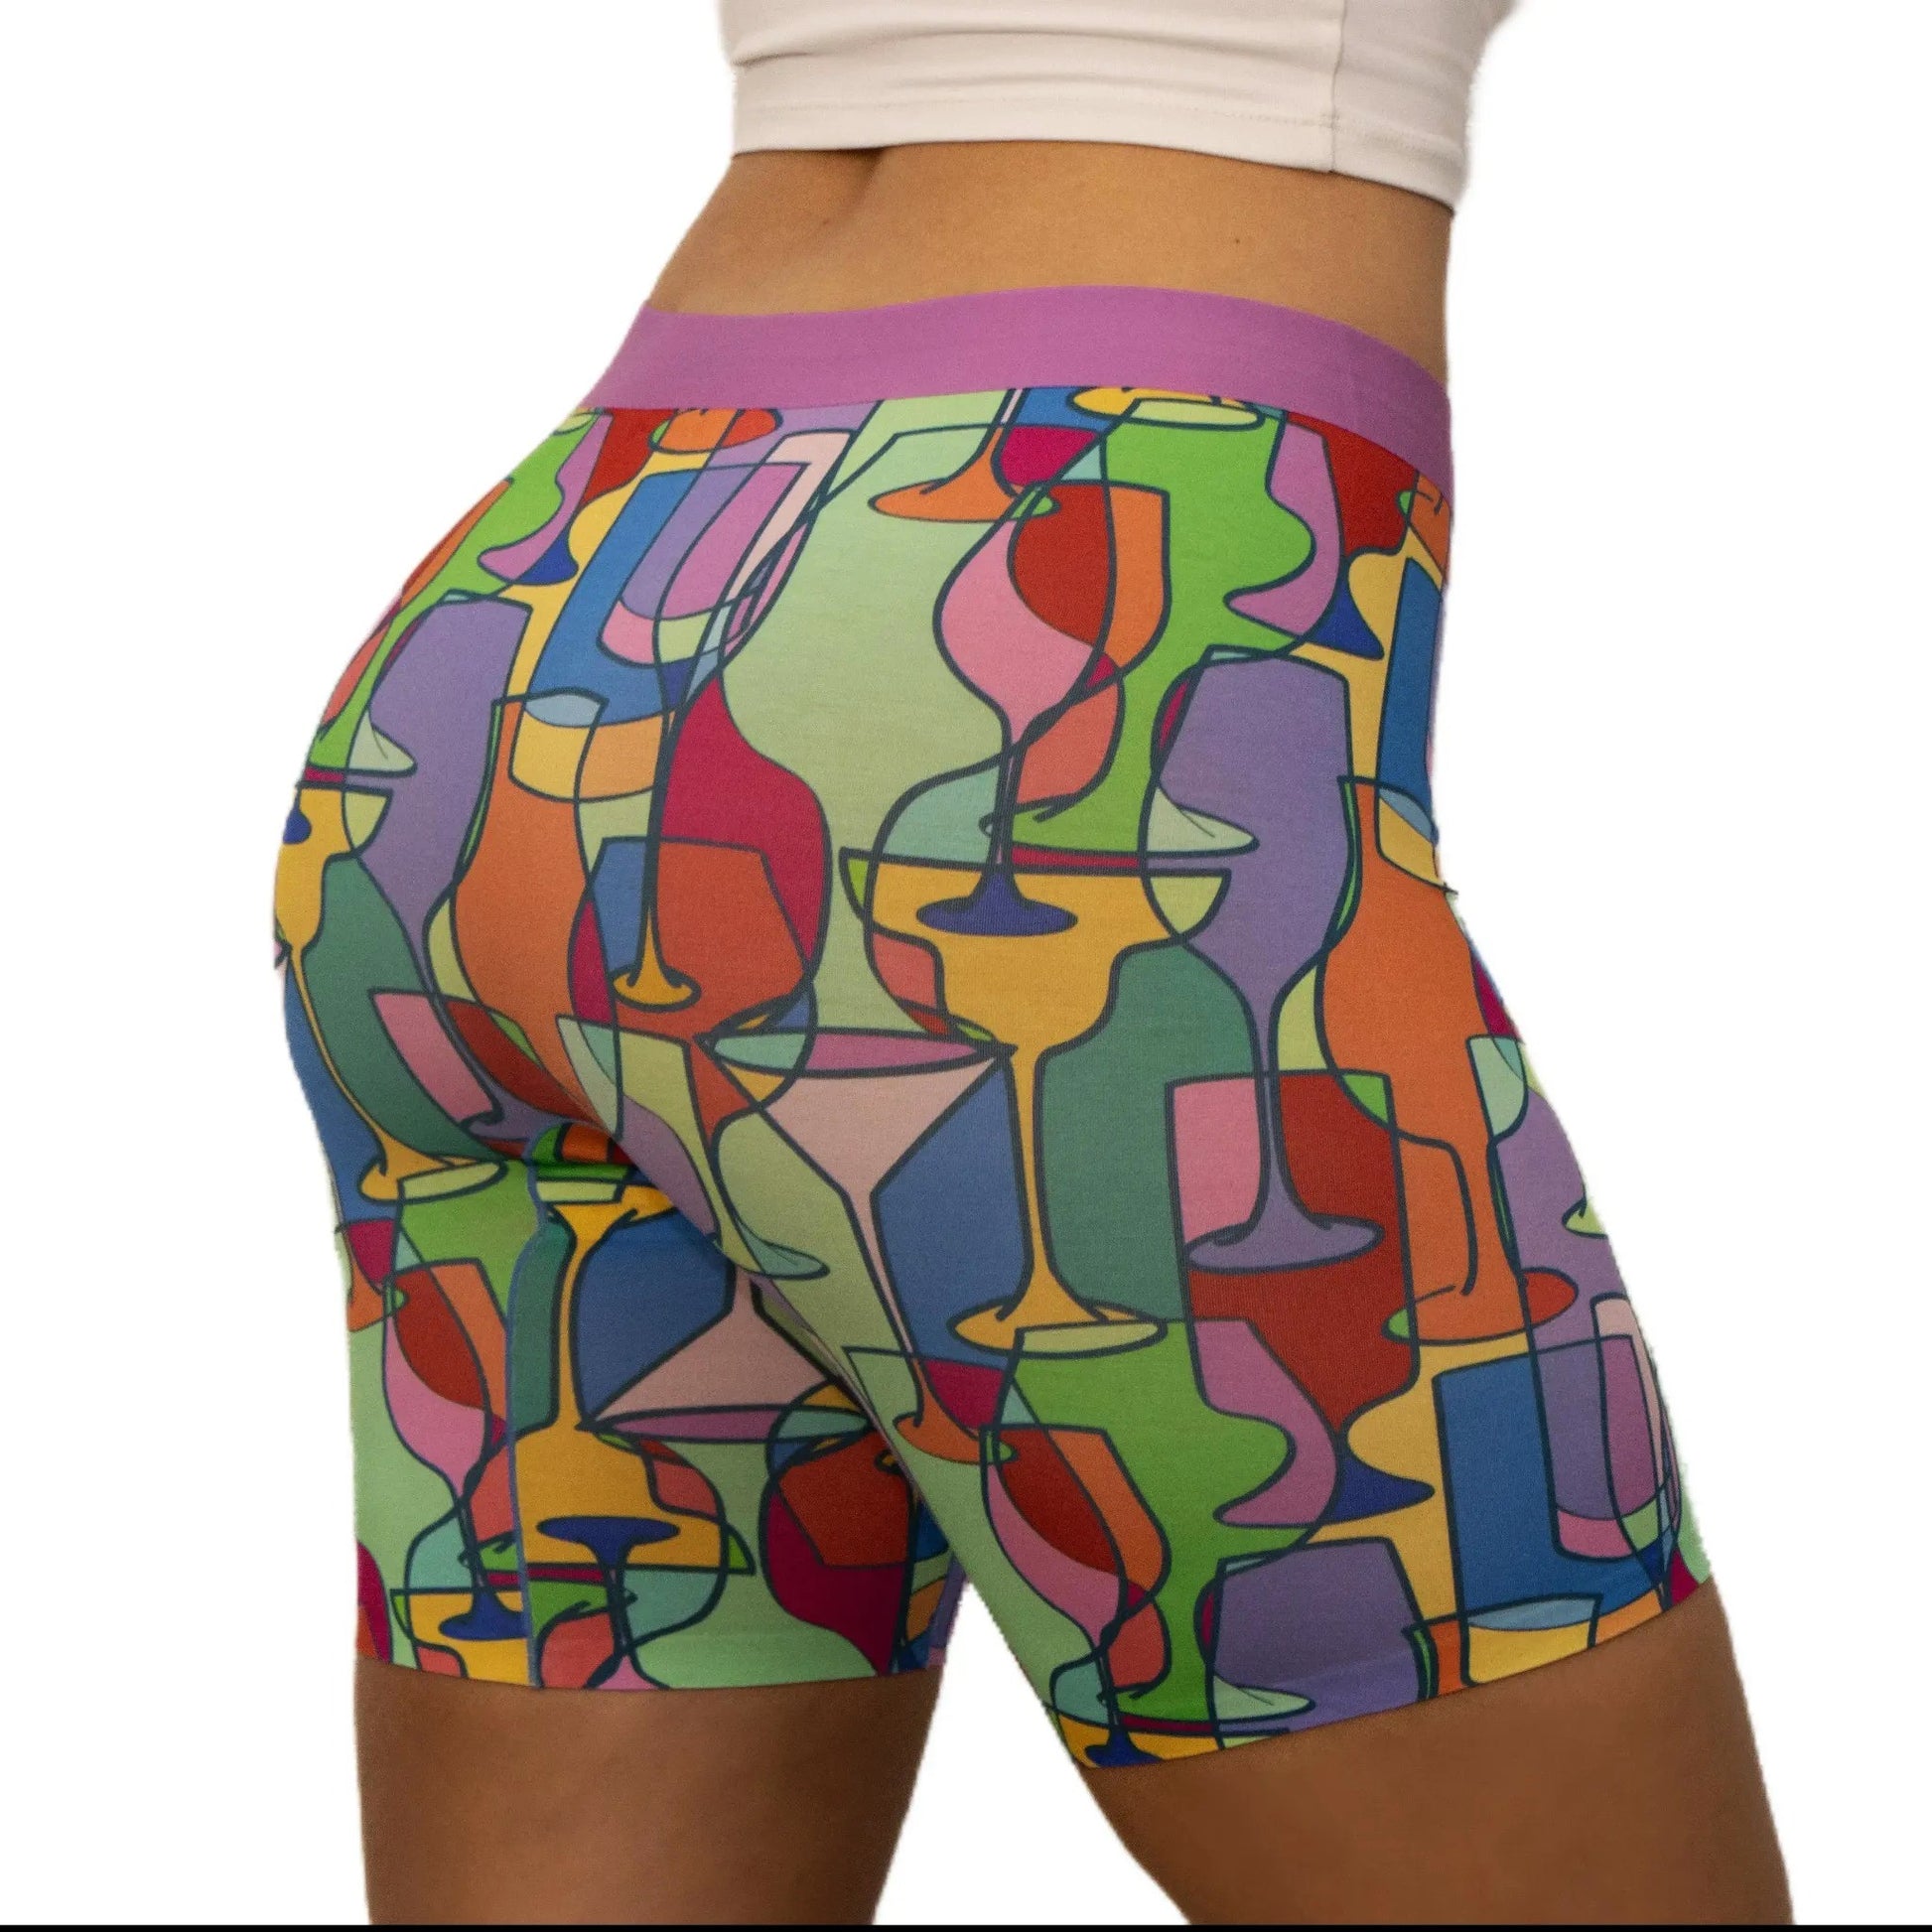 puresnug ladies' boxer briefs side view in wine party print